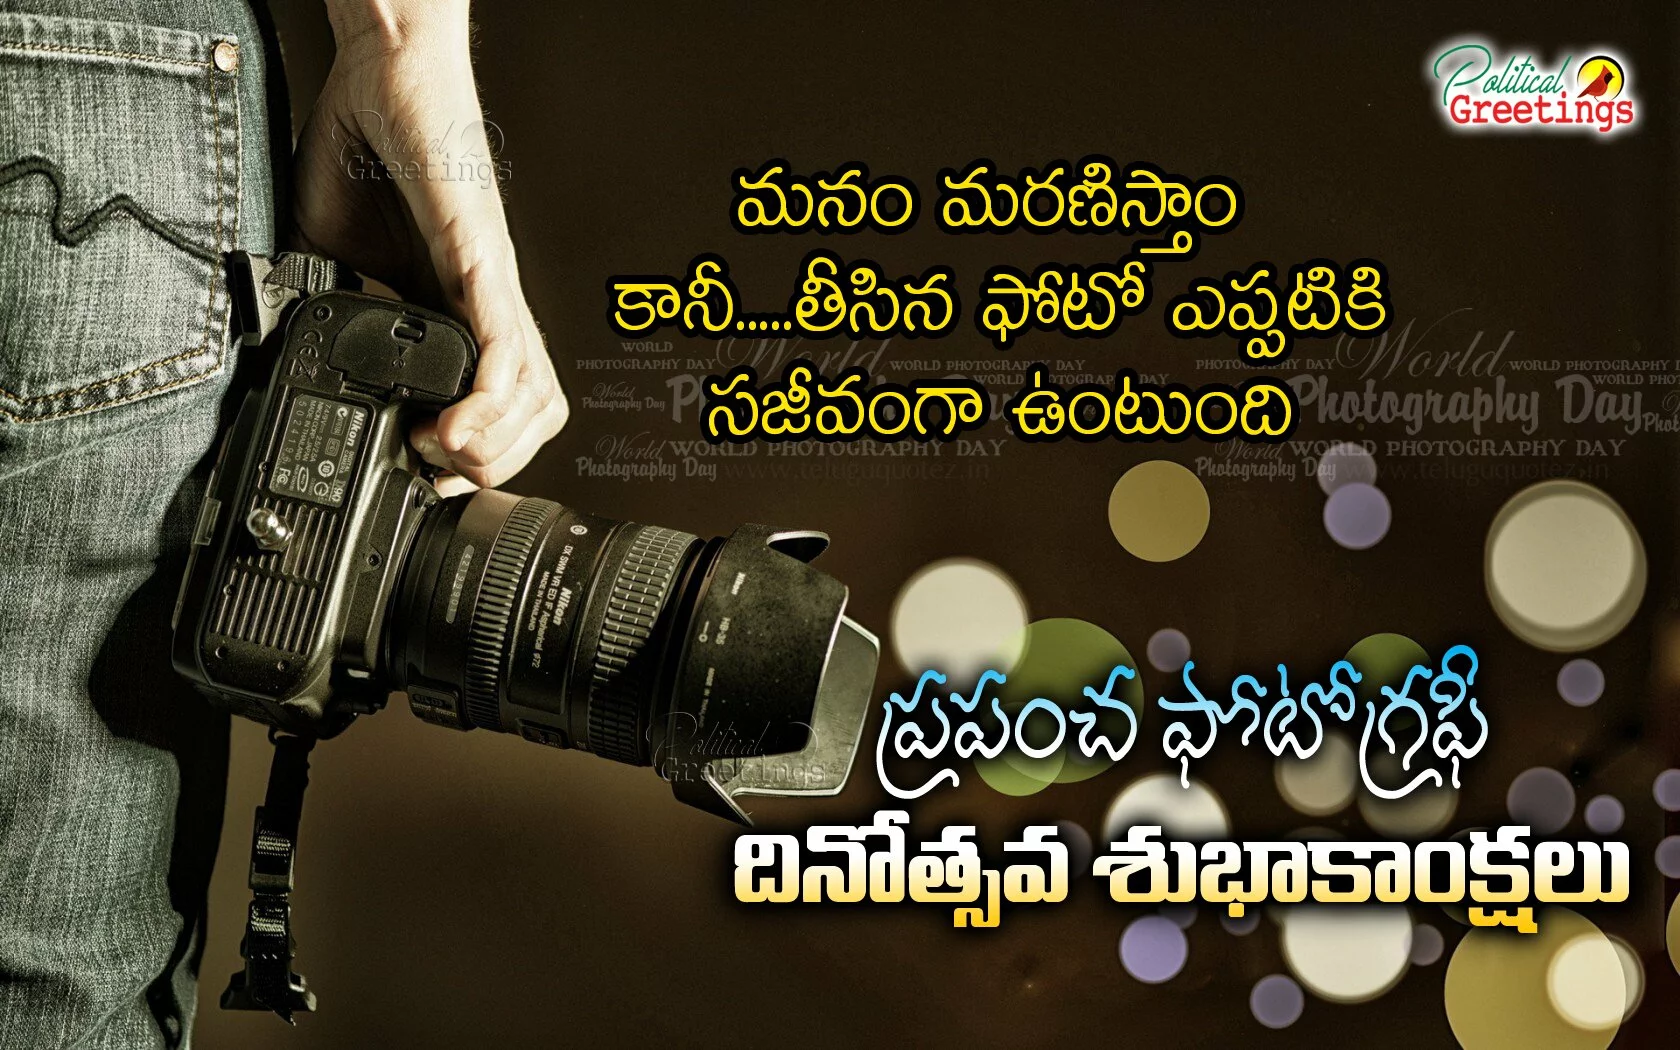 Latest Telugu Advanced International Photography Day Quotes Greetings with Hd Wallpapers Free download